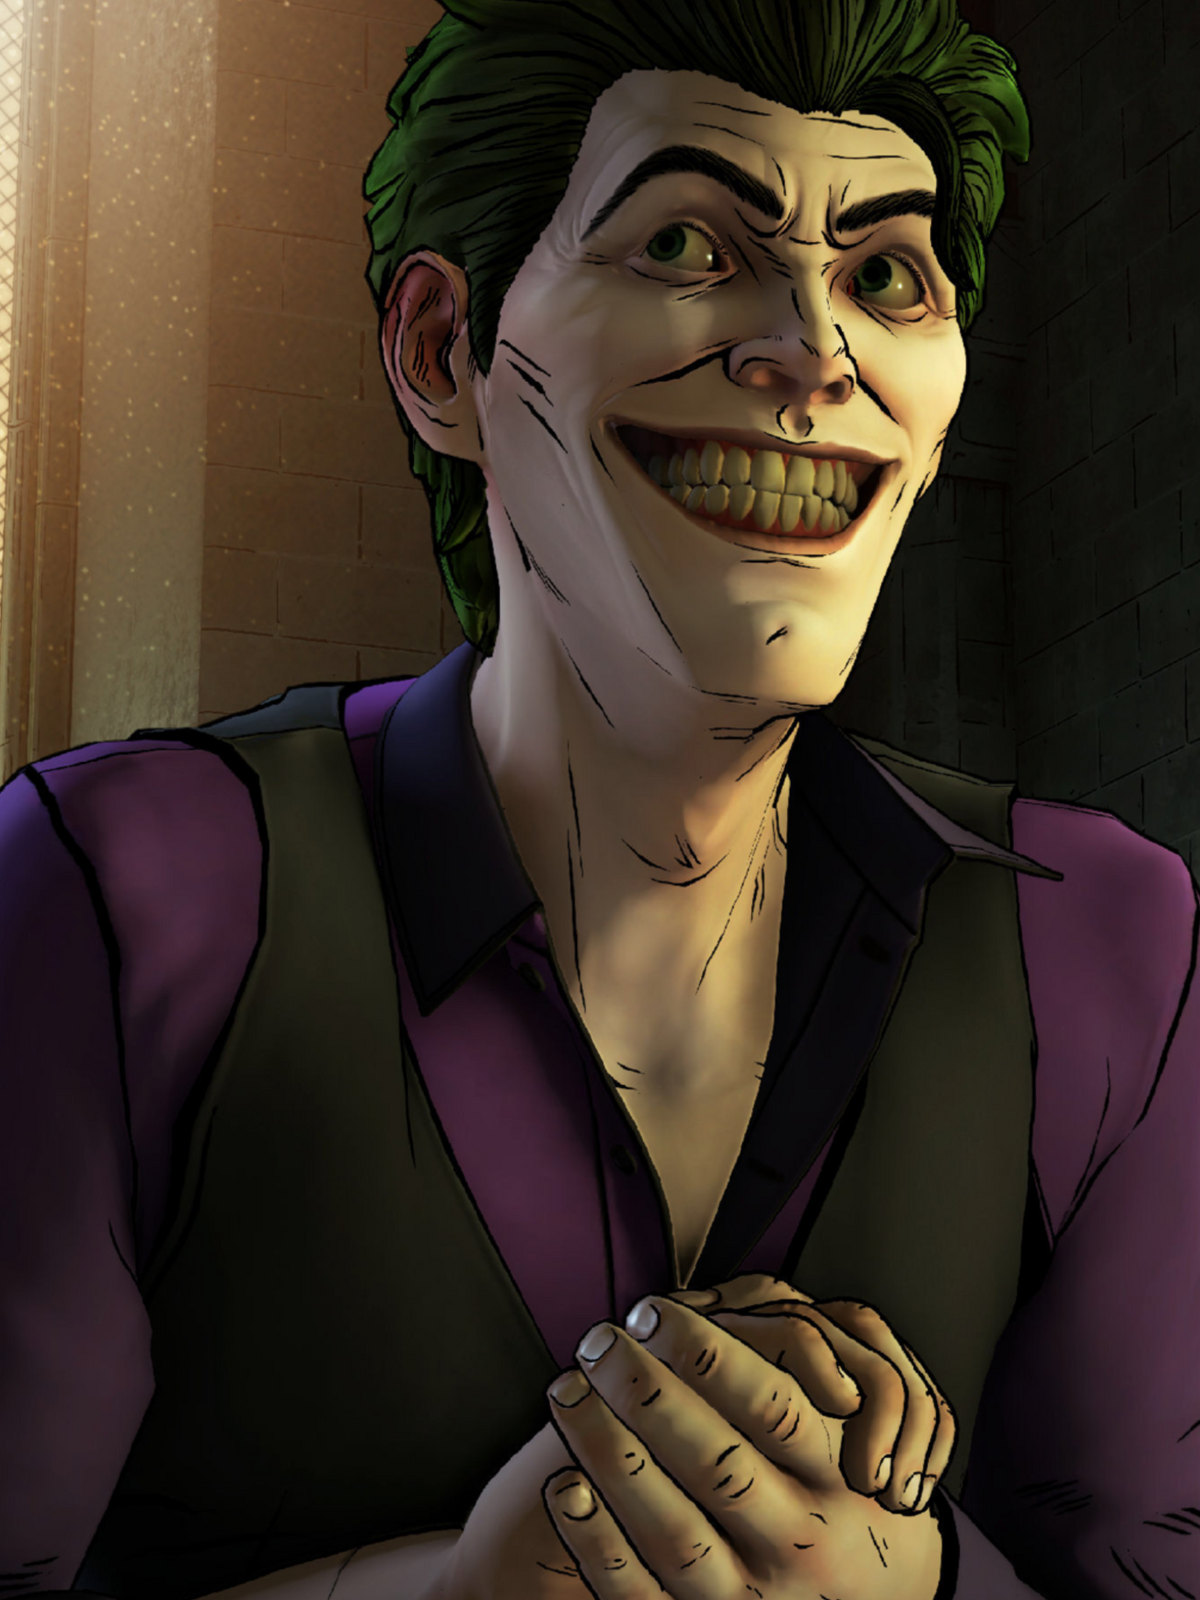 The Tragedy of John Doe, A Discussion on Telltale's Batman: The Enemy  Within - Black Nerd Problems